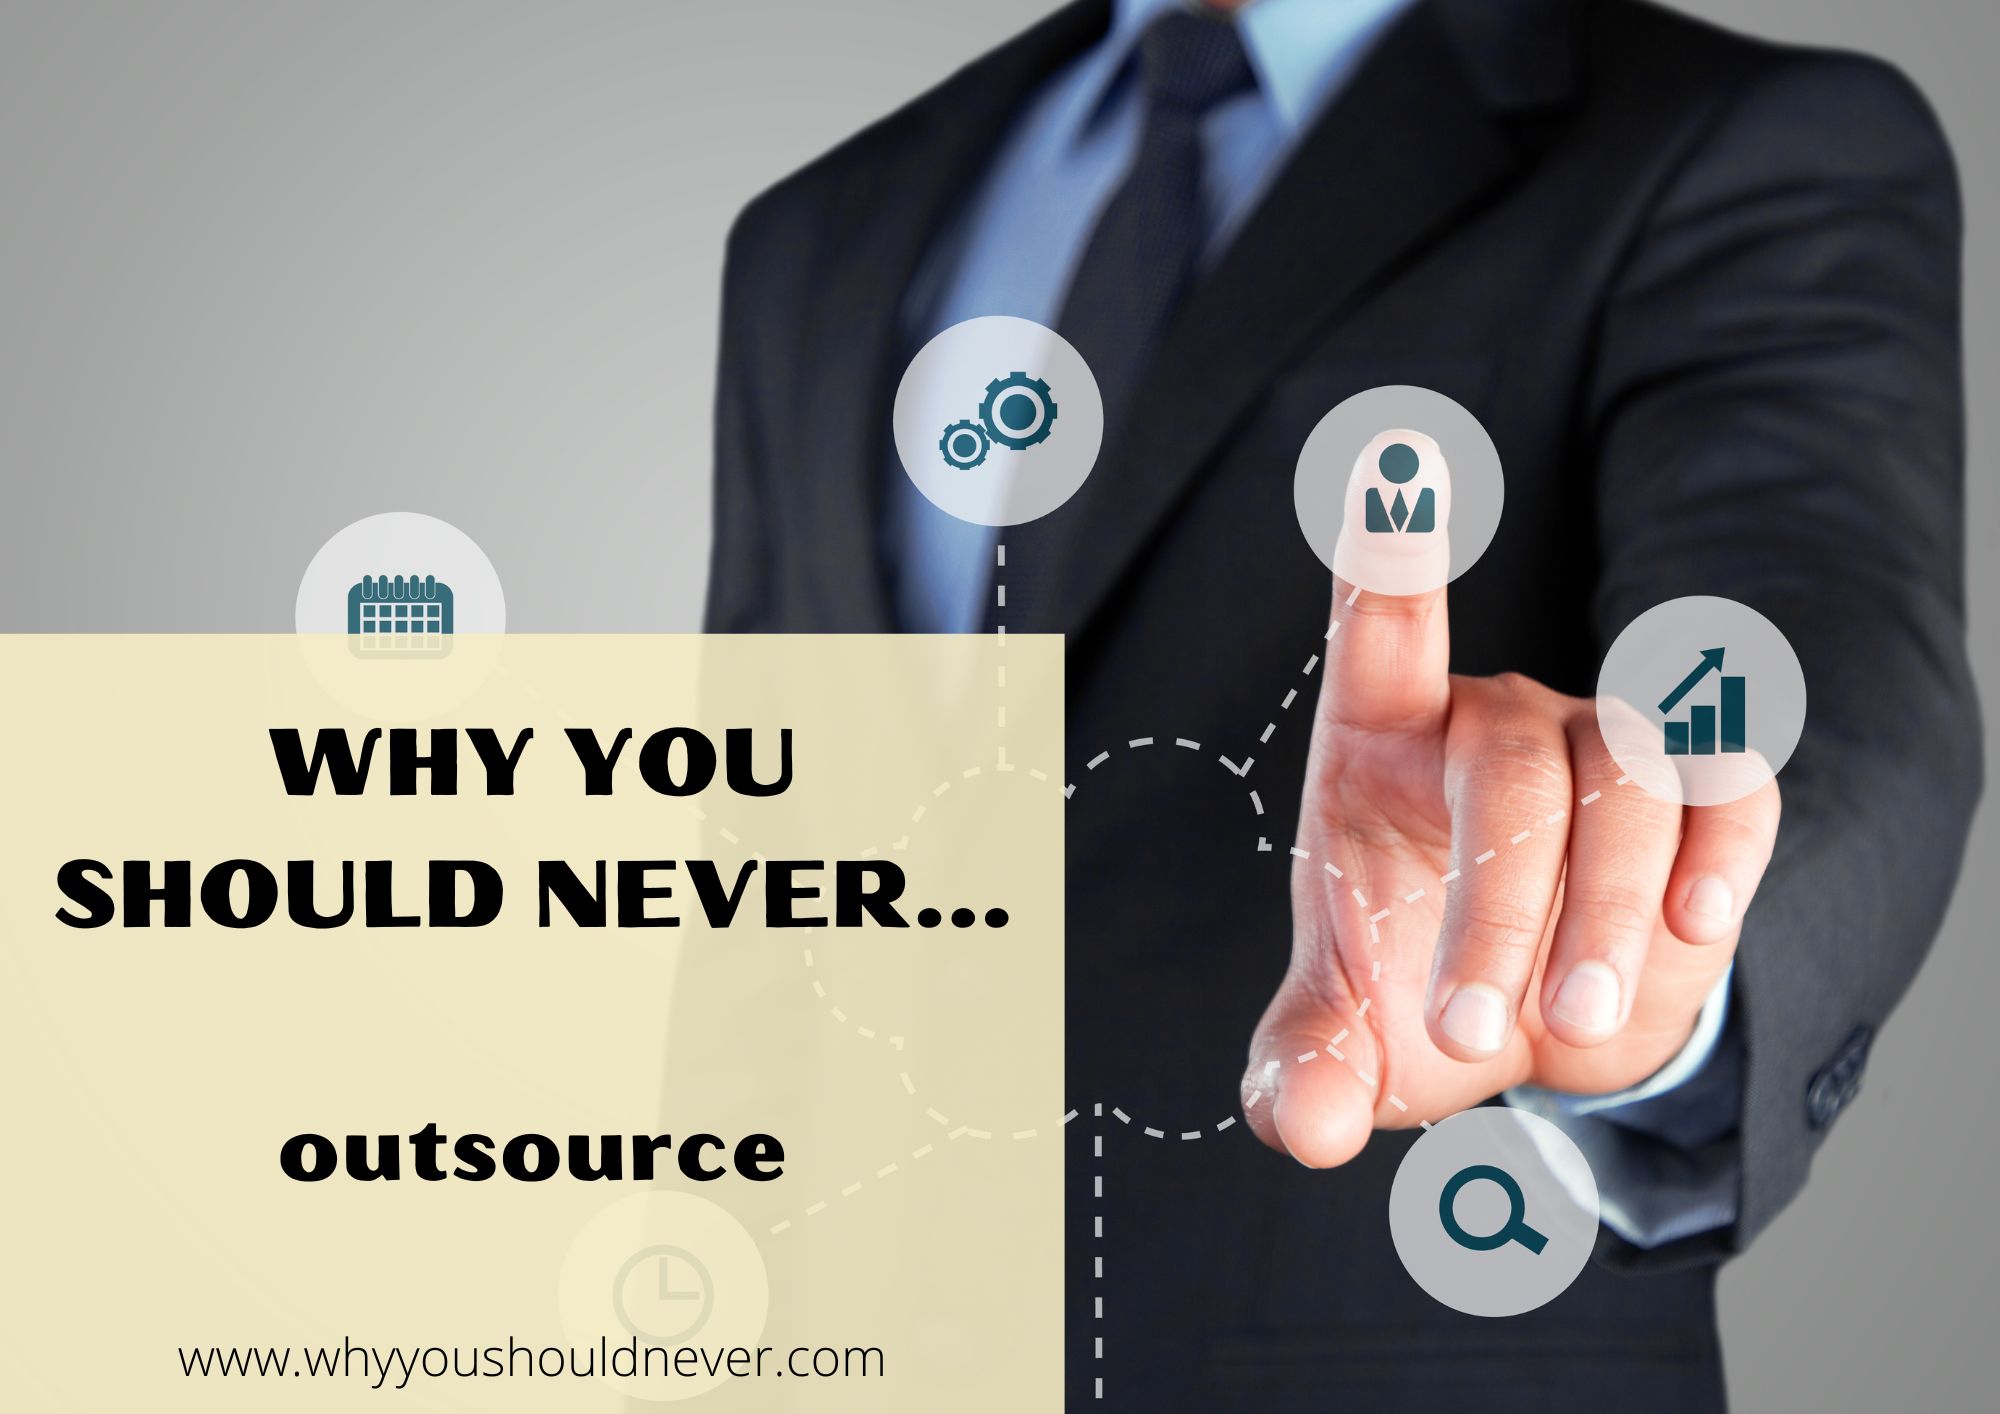 Why You Should Never Outsource